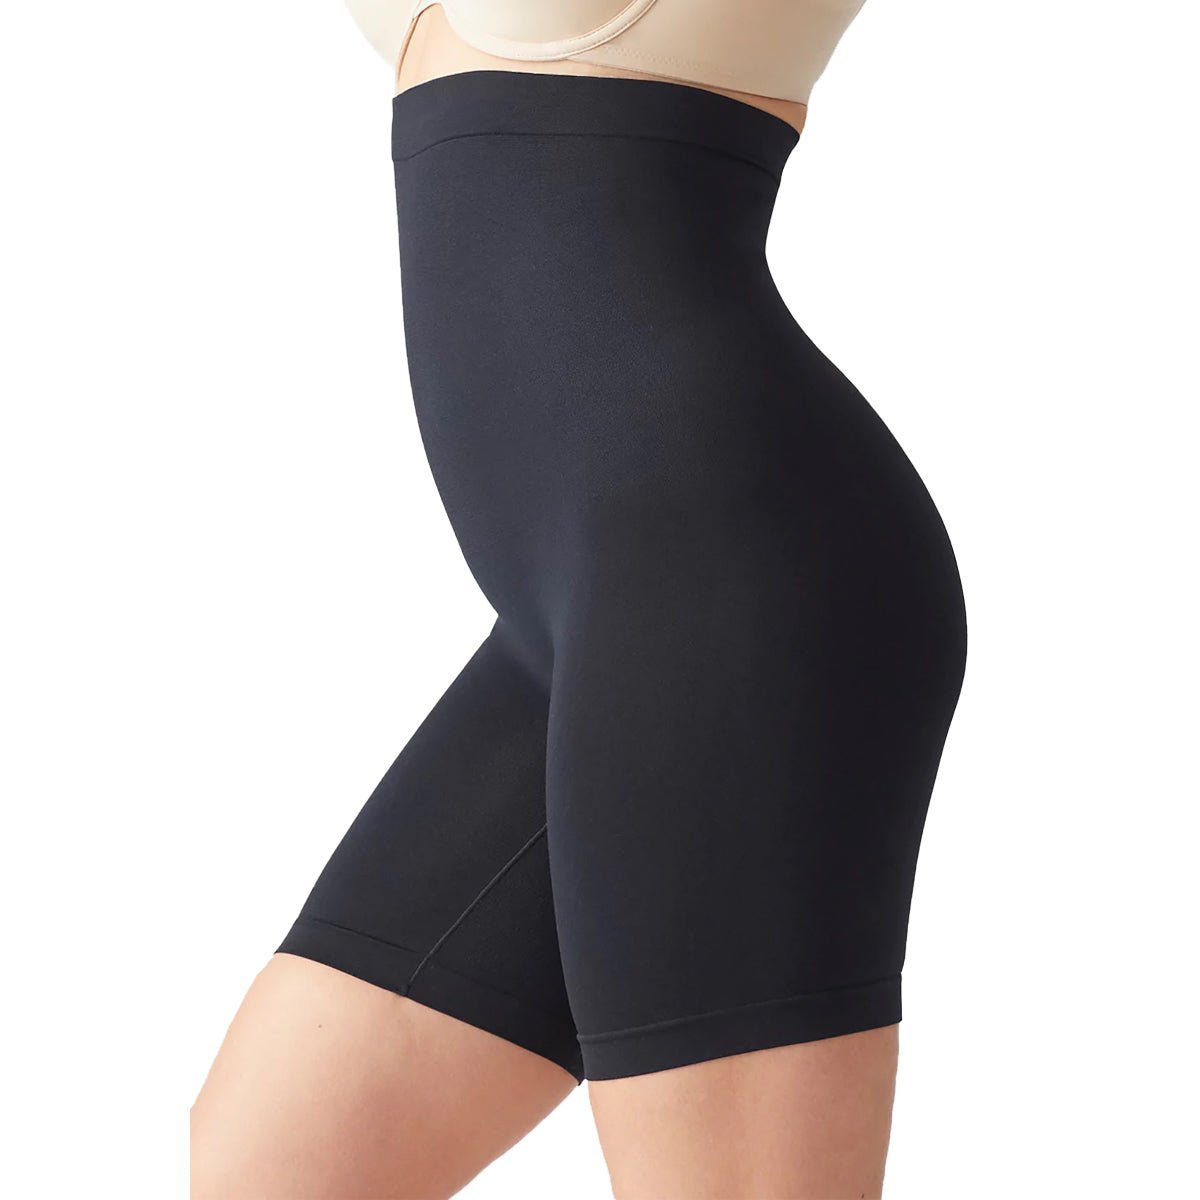 Snatched and smooth because of my @spanx shapewear! Use my code AUDREY,  Shapewear